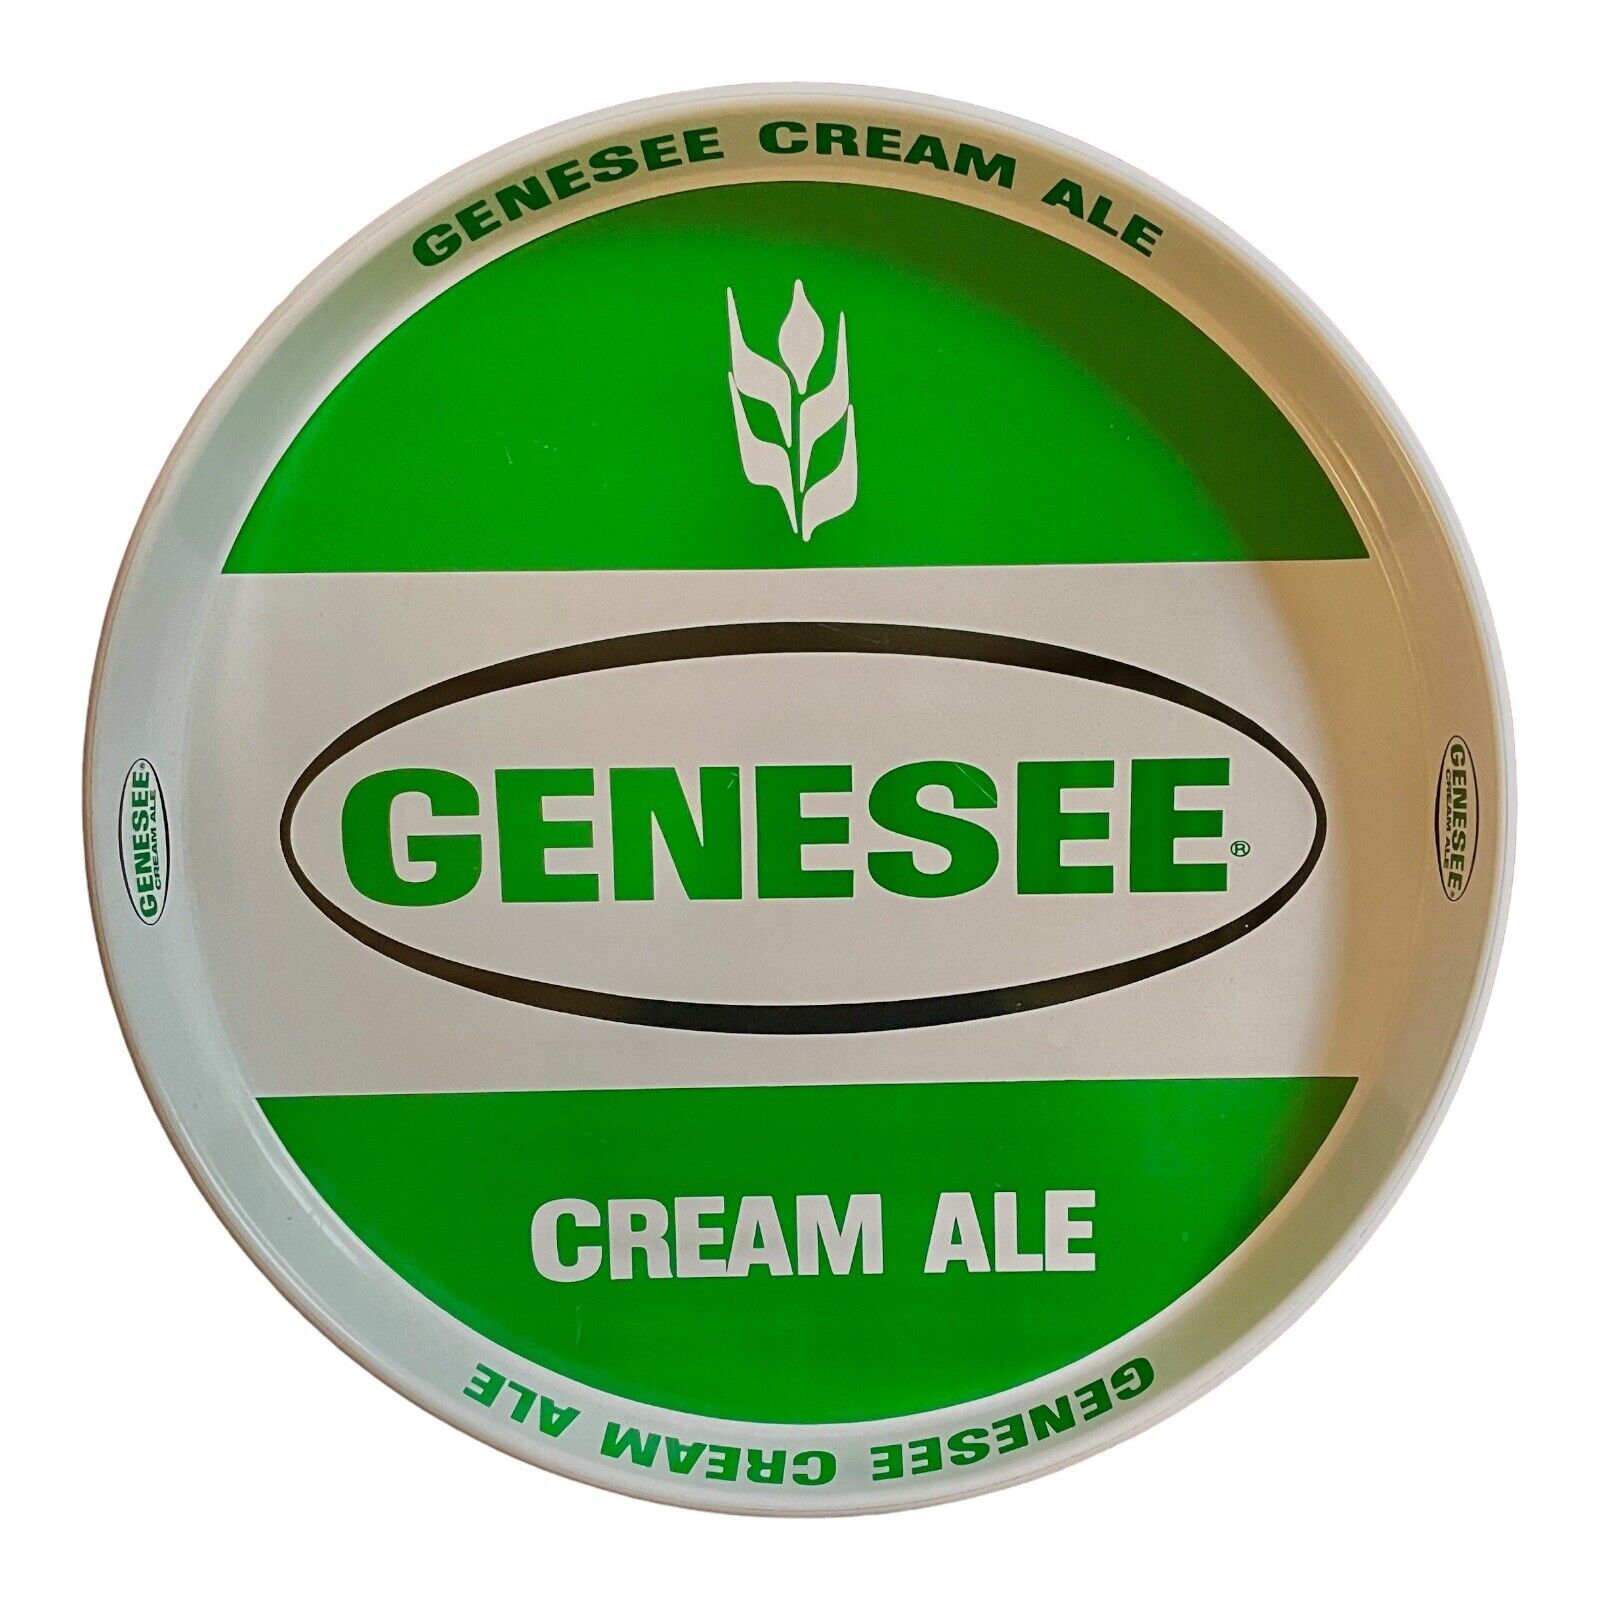 Genesee Cream Ale 12” Metal Serving Tray Rochester NY Vintage Green Logo